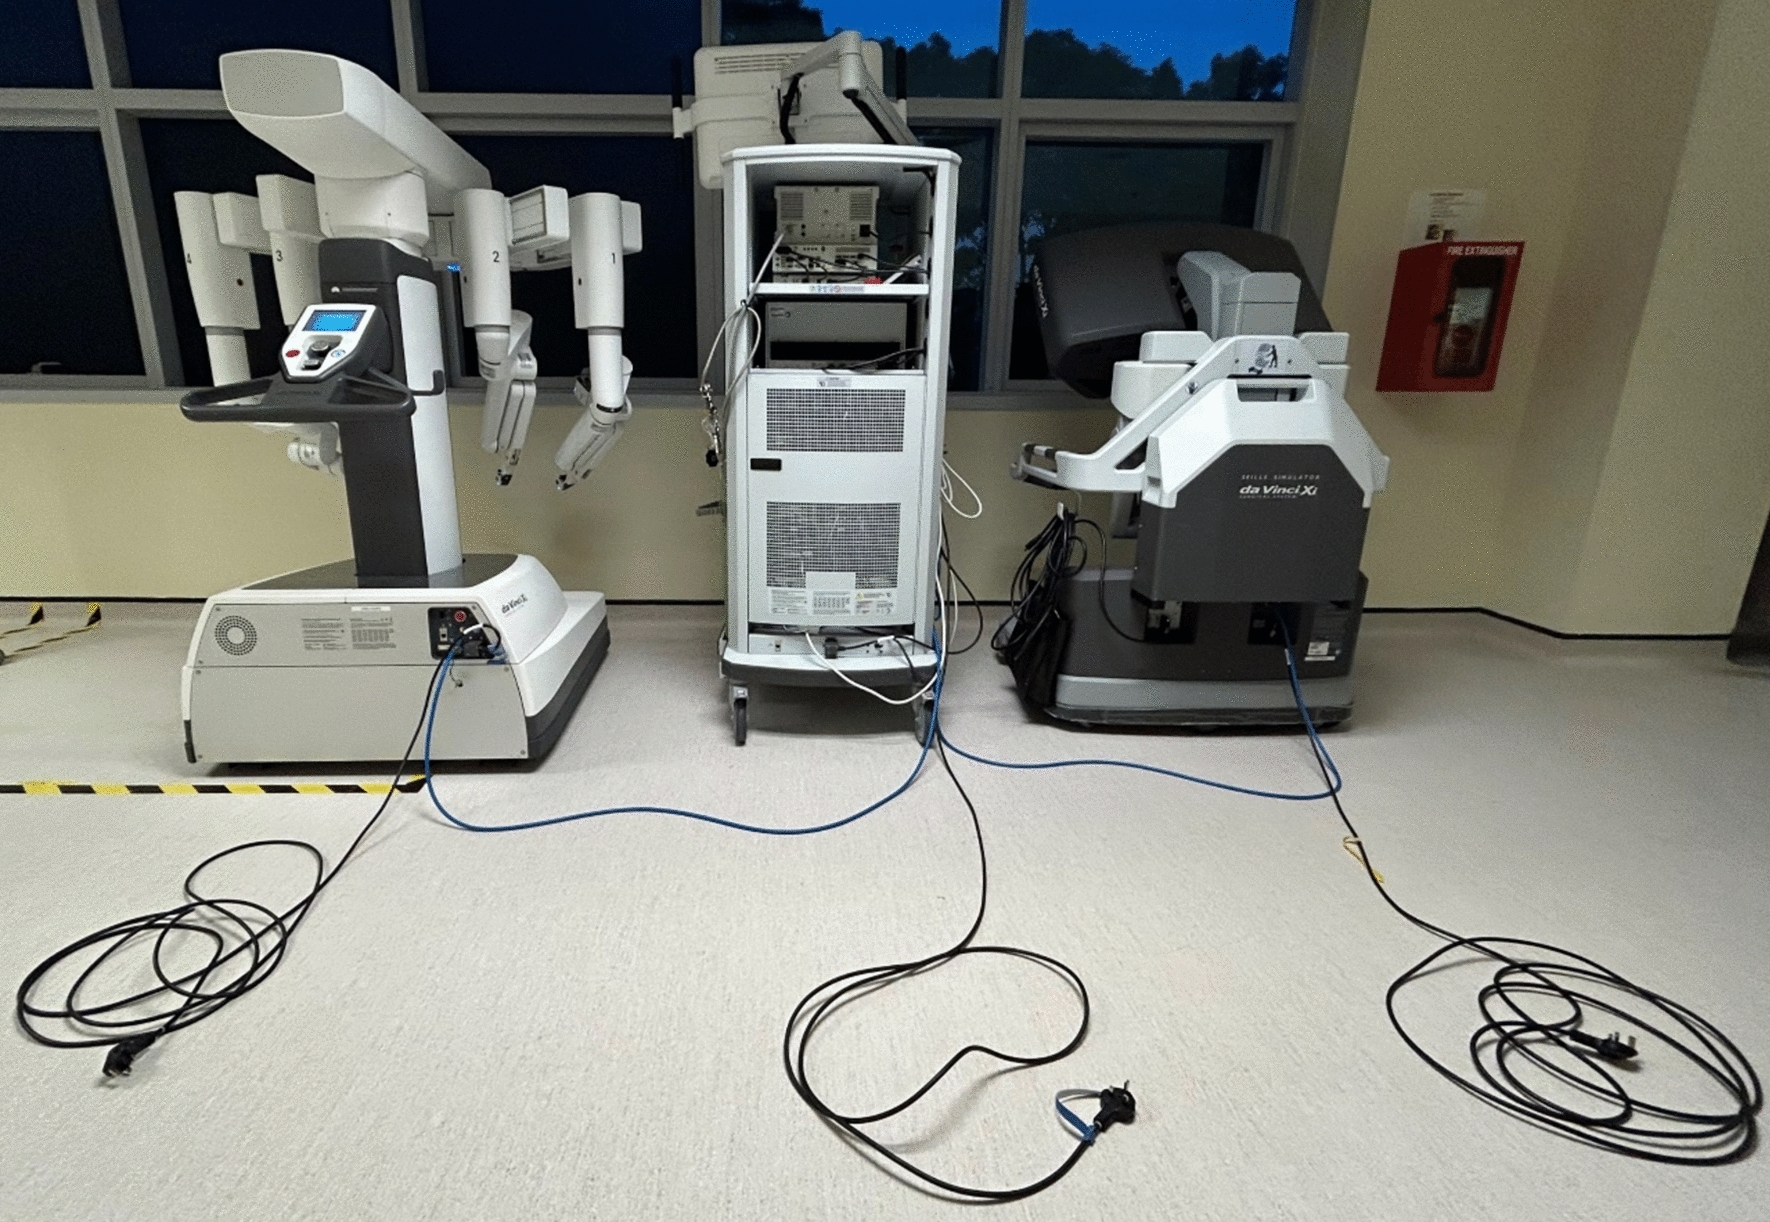 A narrative review of the Medtronic Hugo RAS and technical comparison with the Intuitive da Vinci robotic surgical system